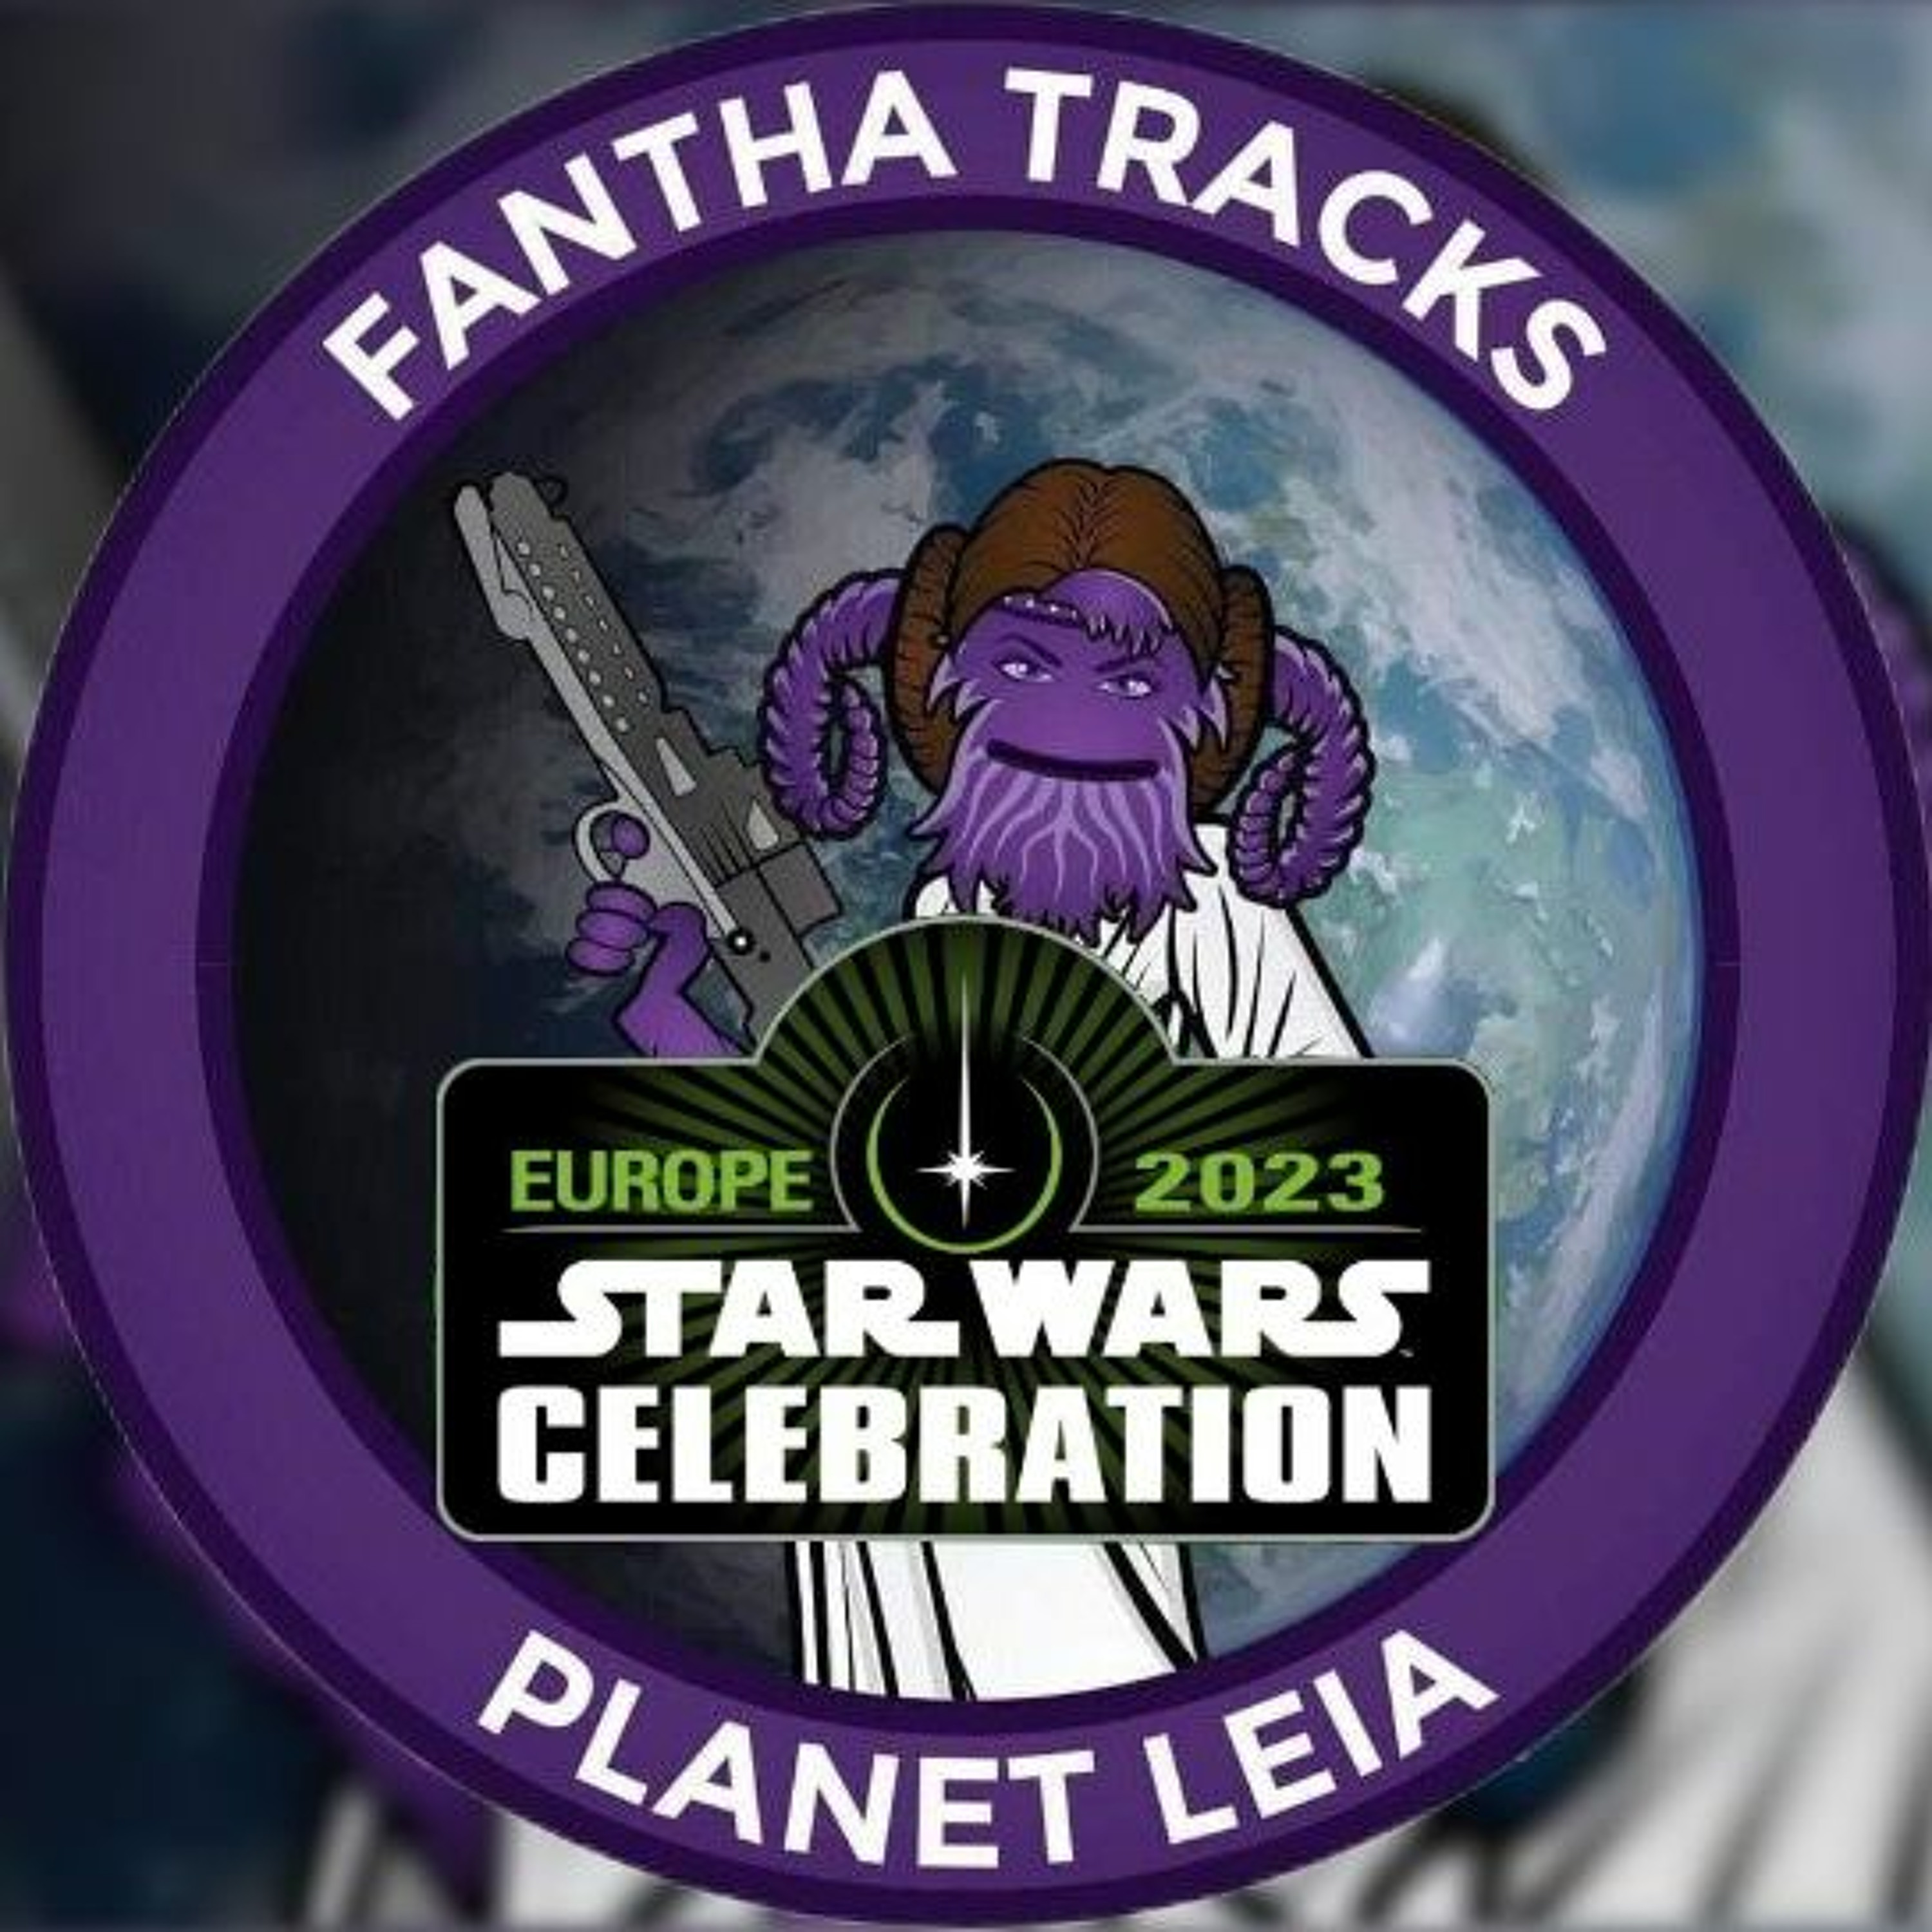 Planet Leia Episode 15: 30,000 hungry nerds coming for you